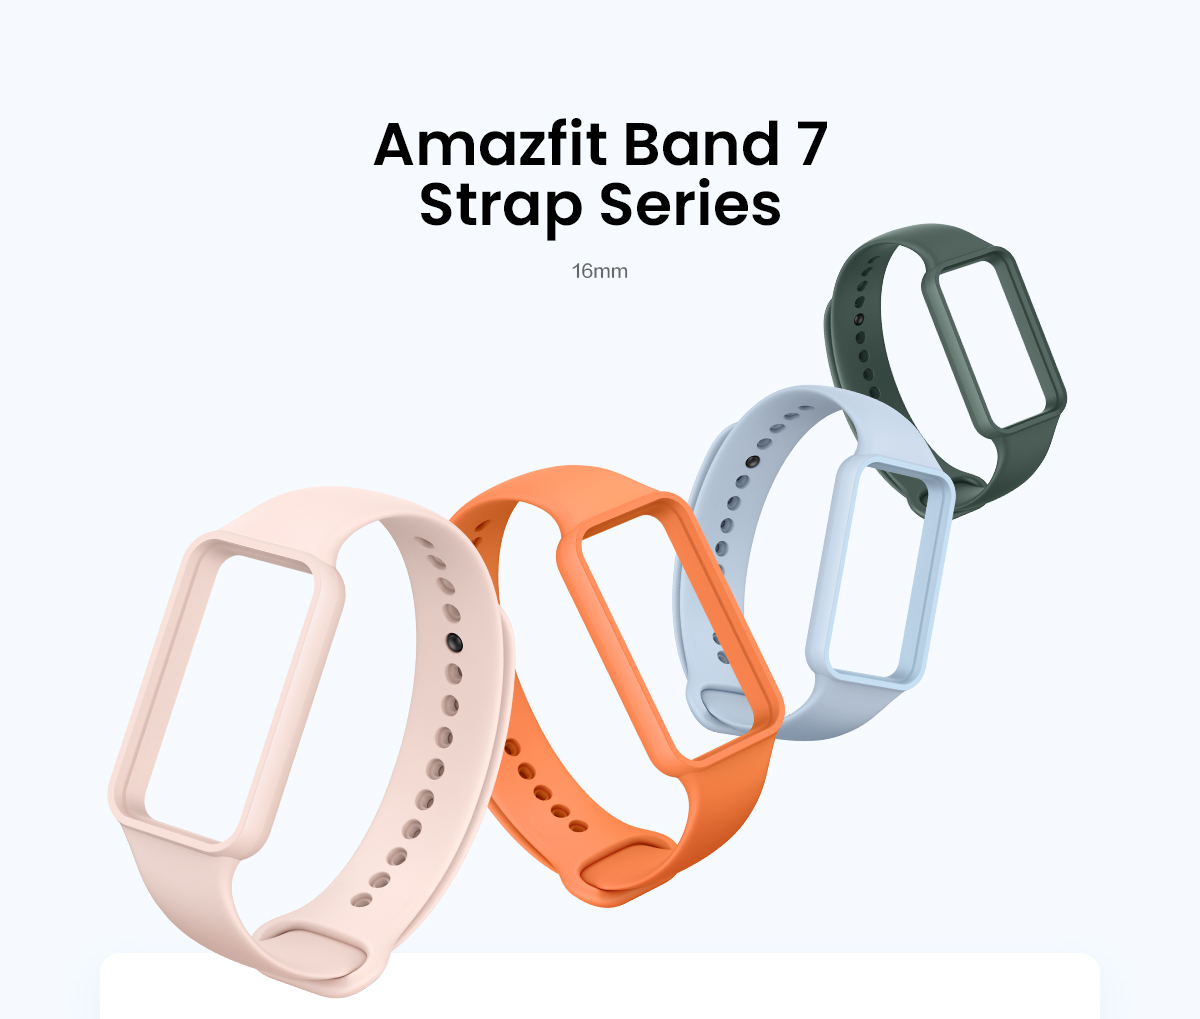  NineHorse 4PACKS Watch Bands Compatible with Amazfit Band 7  Strap,Silicone Bands Metal Buckle Adjustable Wristband Bracelet Sport Strap  for Amazfit Band 7 Replacement Band (10Colors) : Cell Phones & Accessories